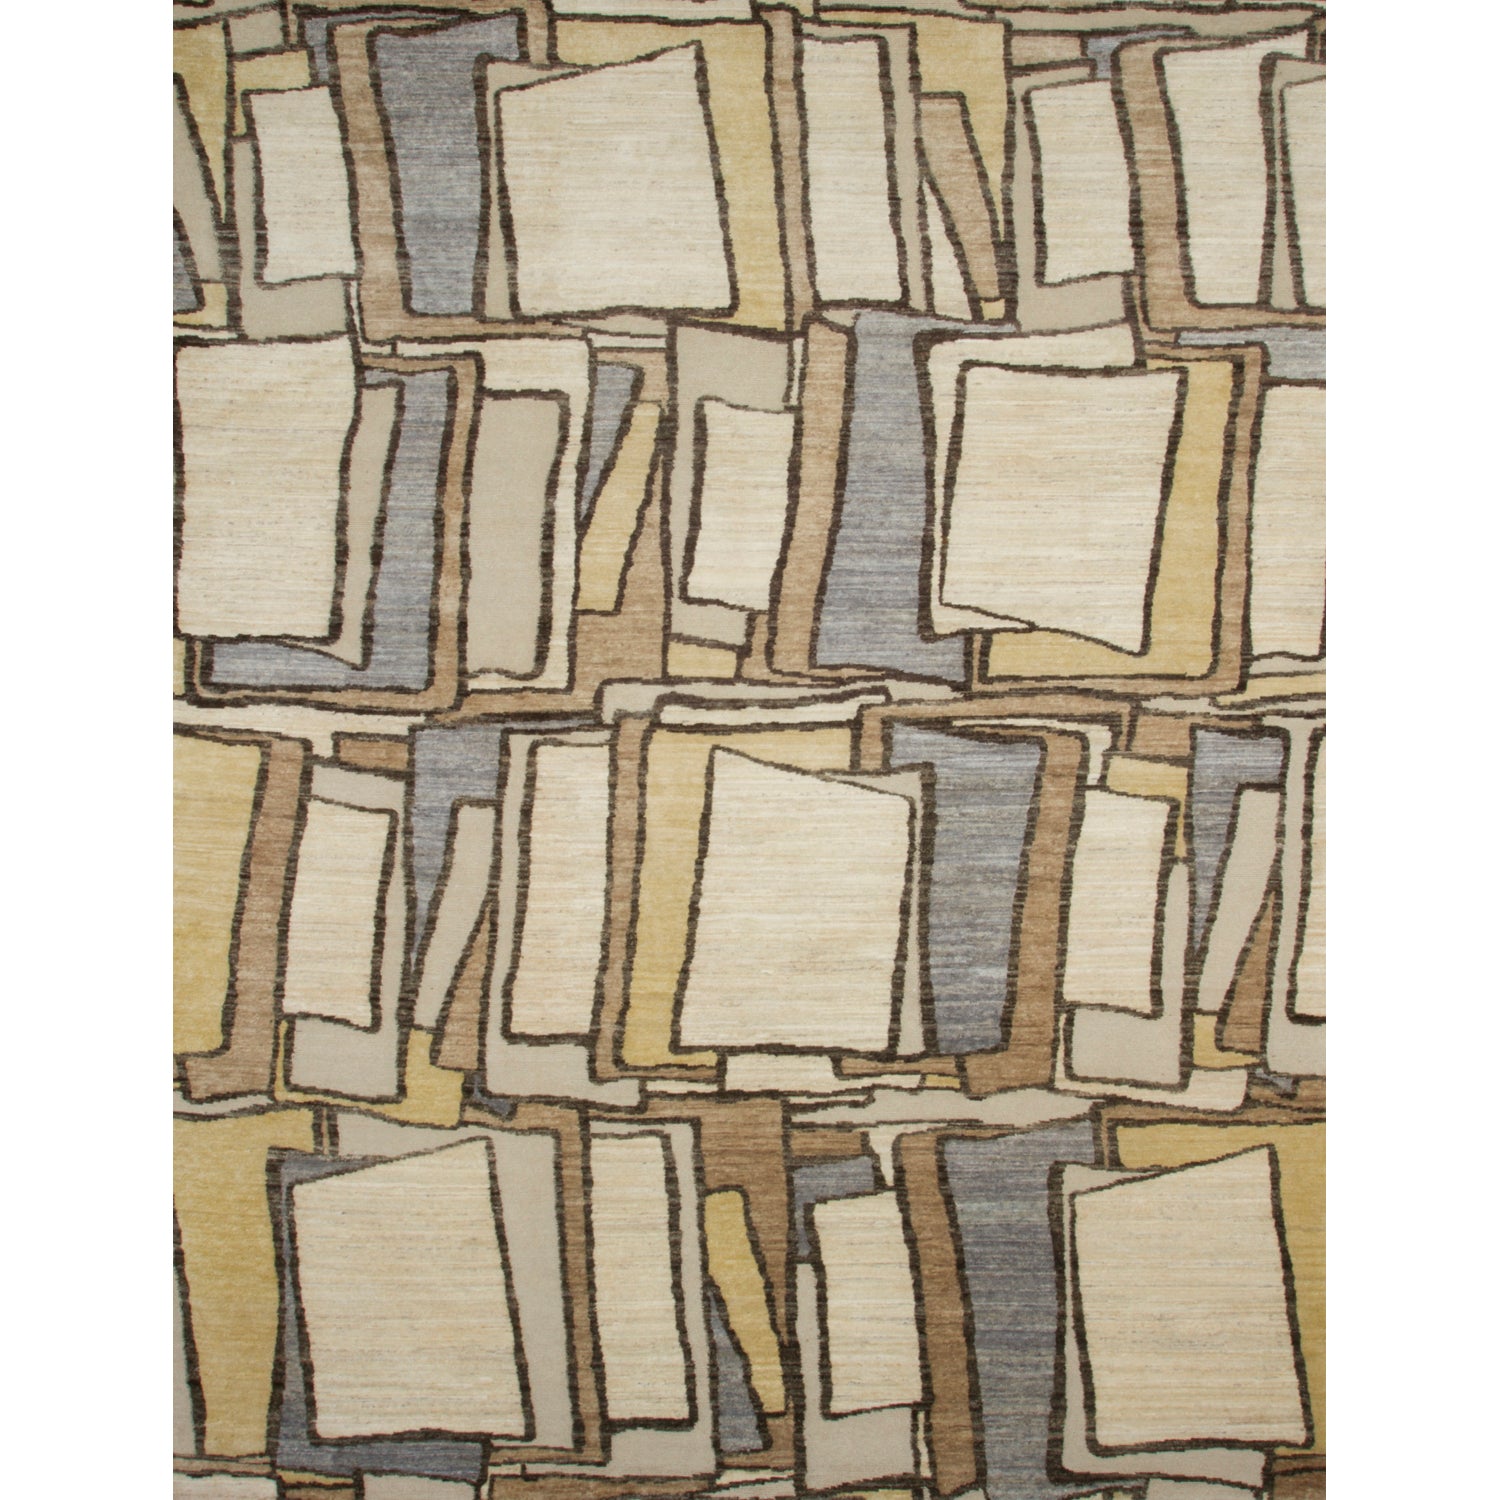 Rectangular rug in an overlapping hand-drawn rectangle pattern in shades of cream, gray, tan and brown.